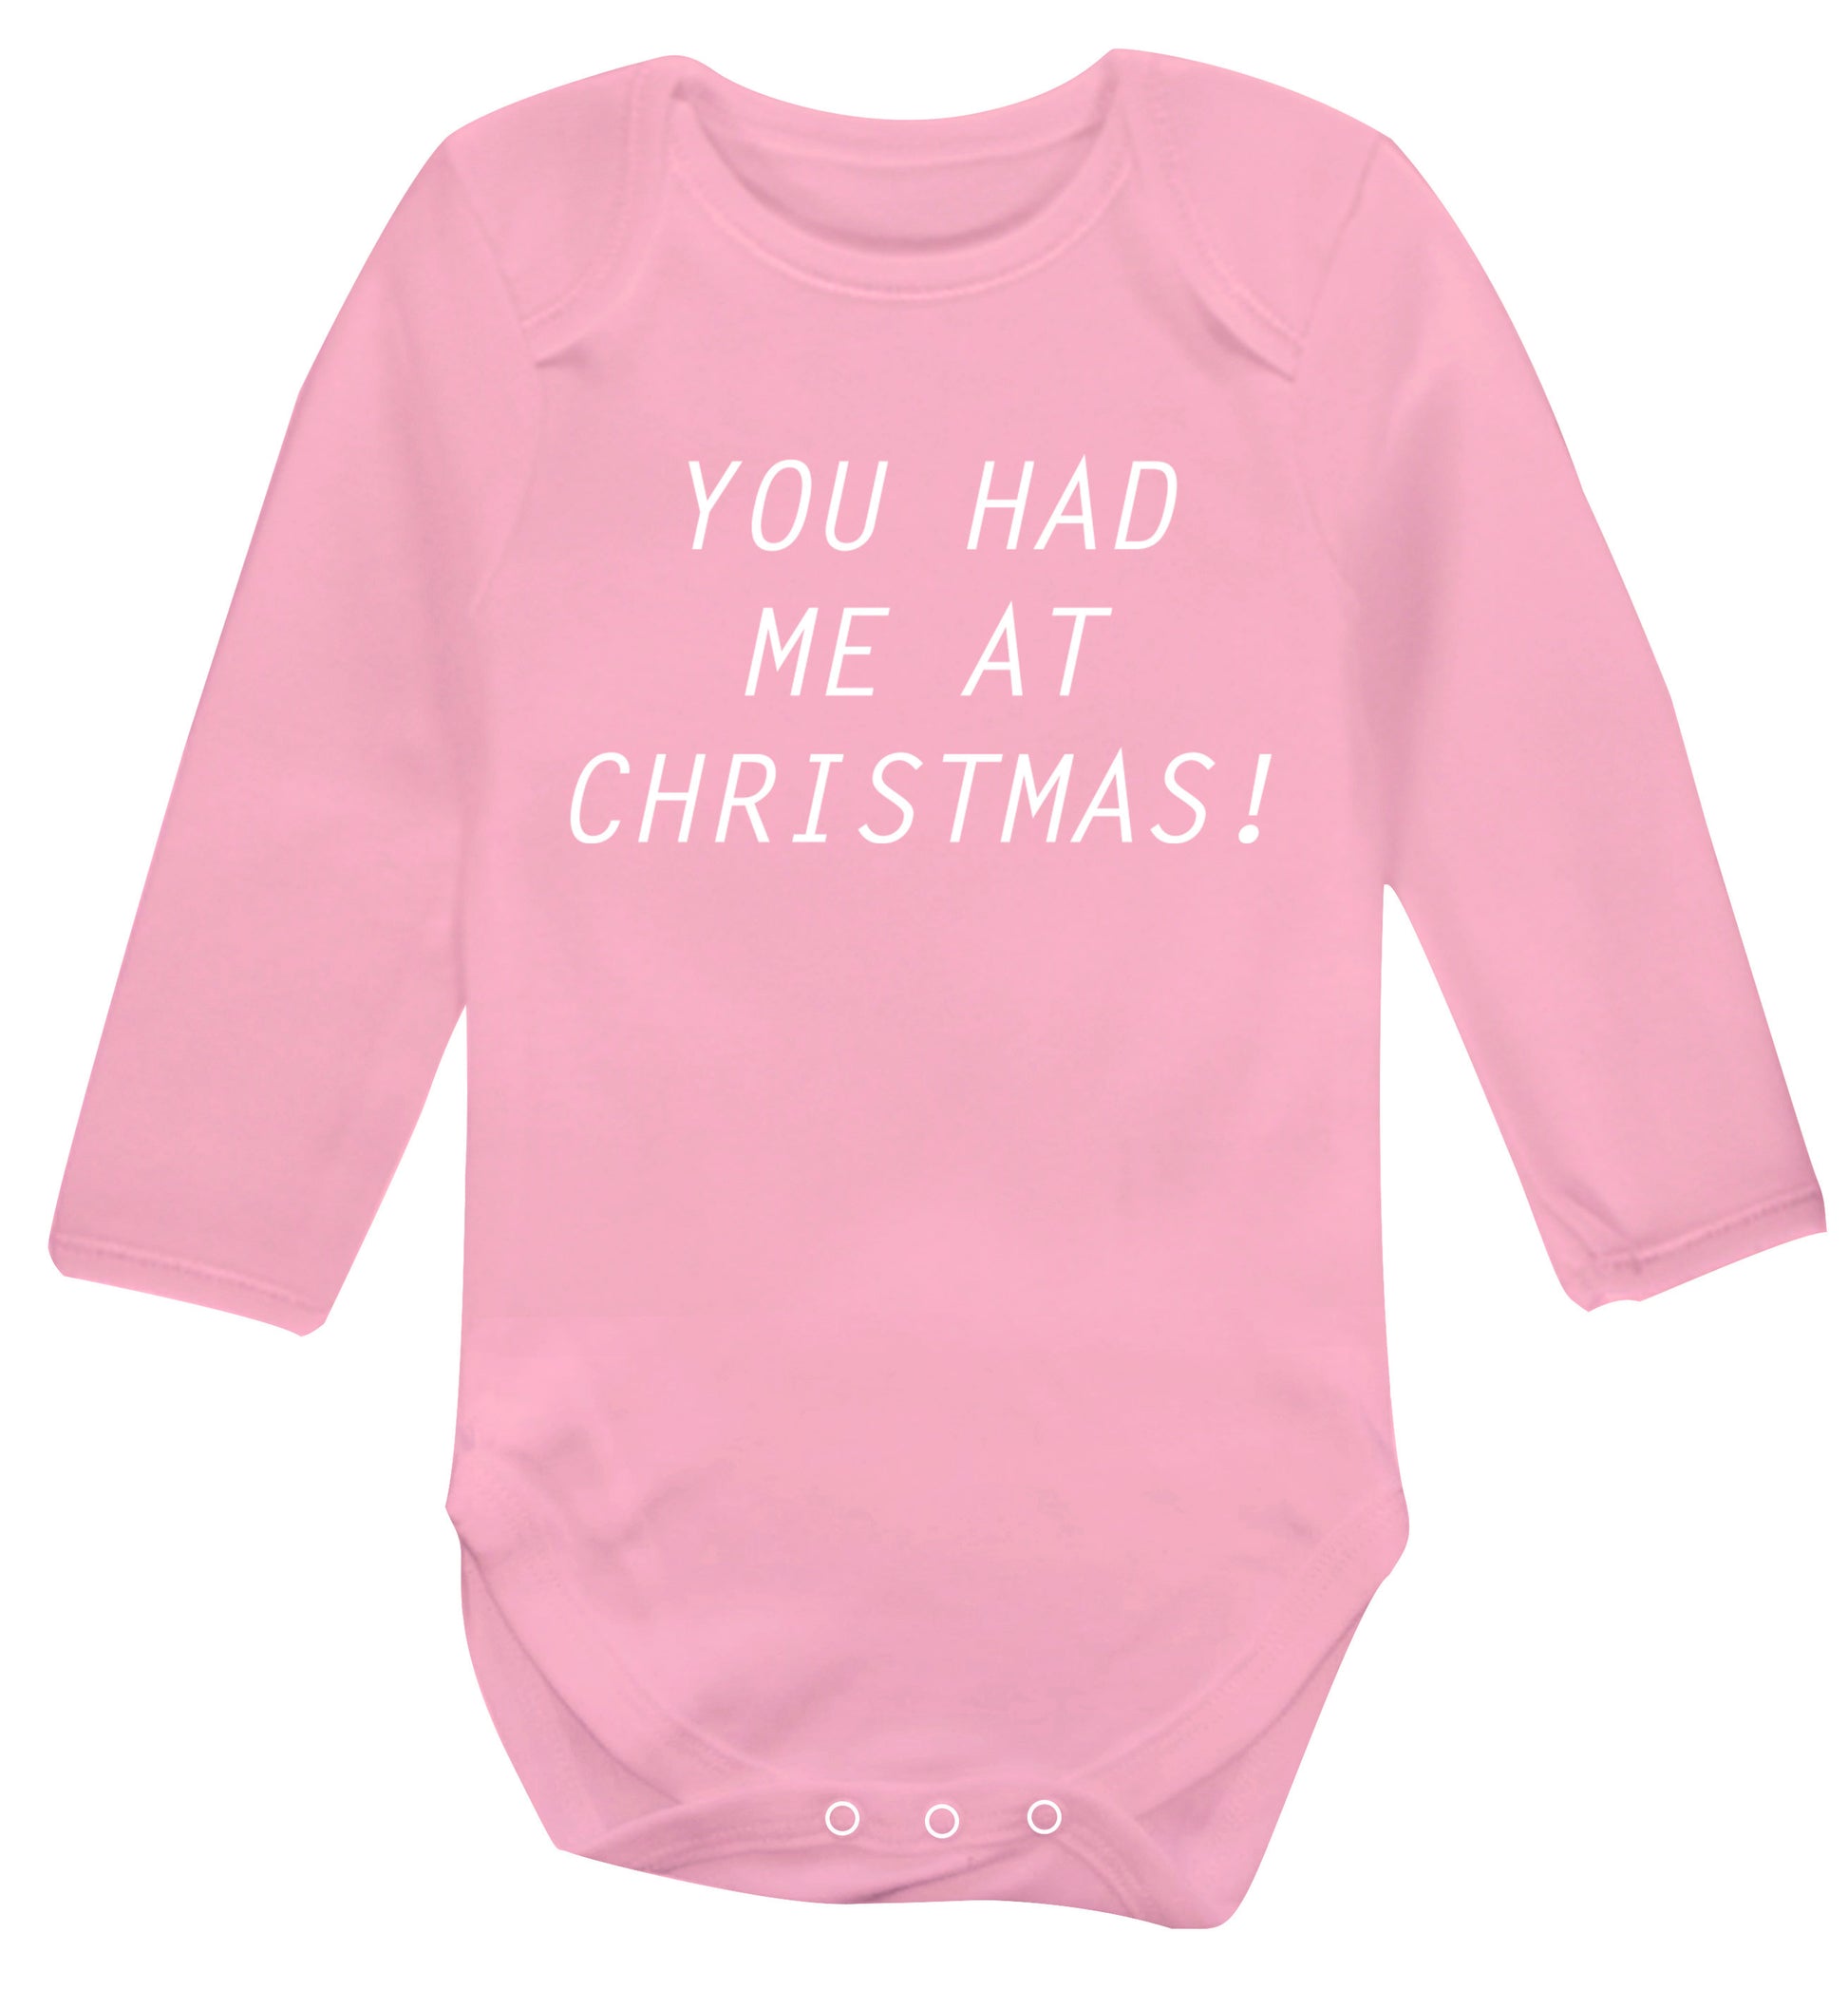 You had me at Christmas Baby Vest long sleeved pale pink 6-12 months